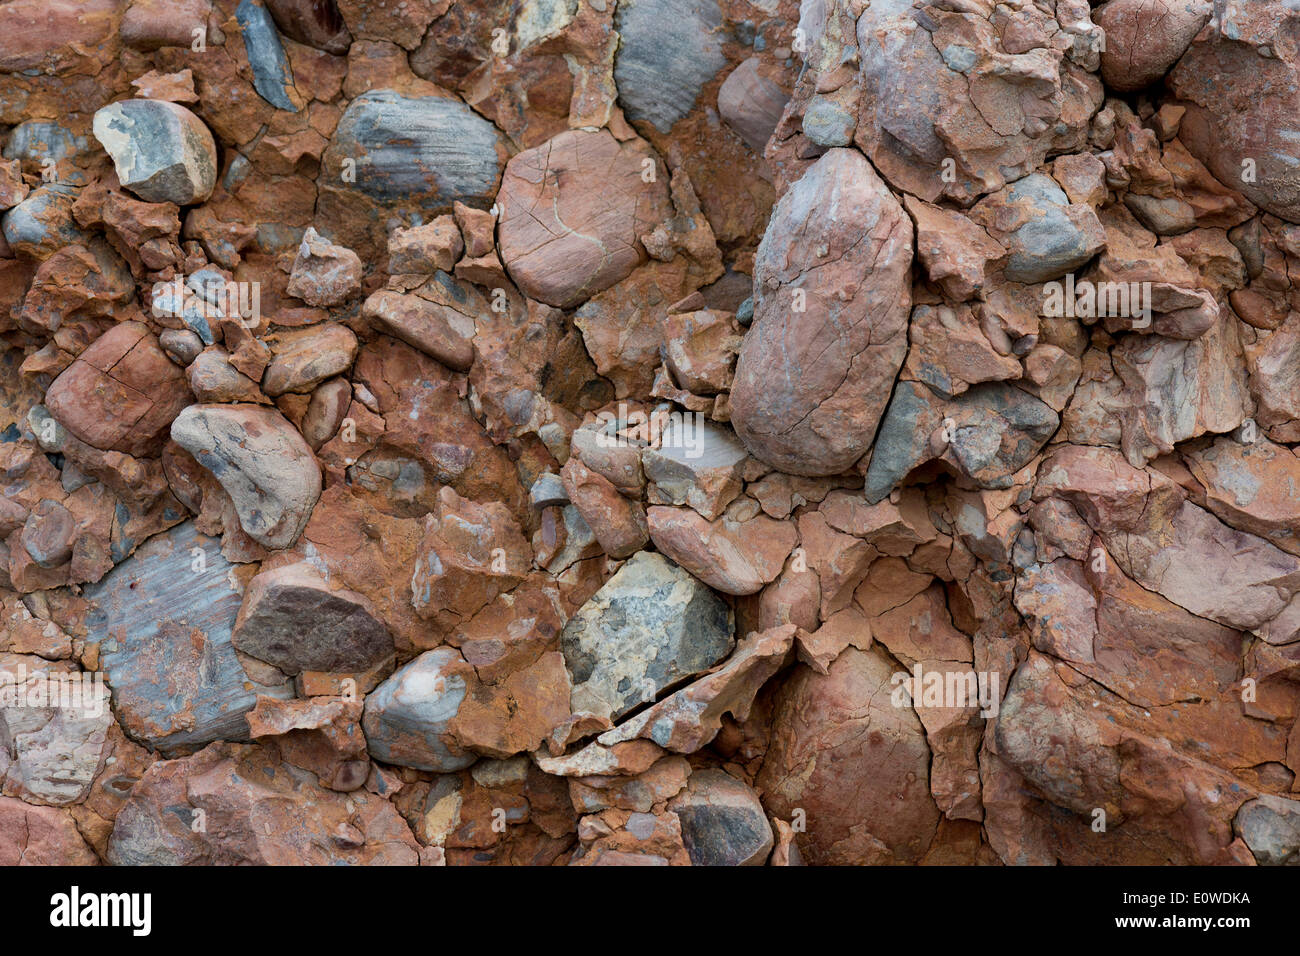 Iron oxide-containing sediment, conglomerate out of the rubble of the Caledonian mountain range, known as Old Red Stock Photo